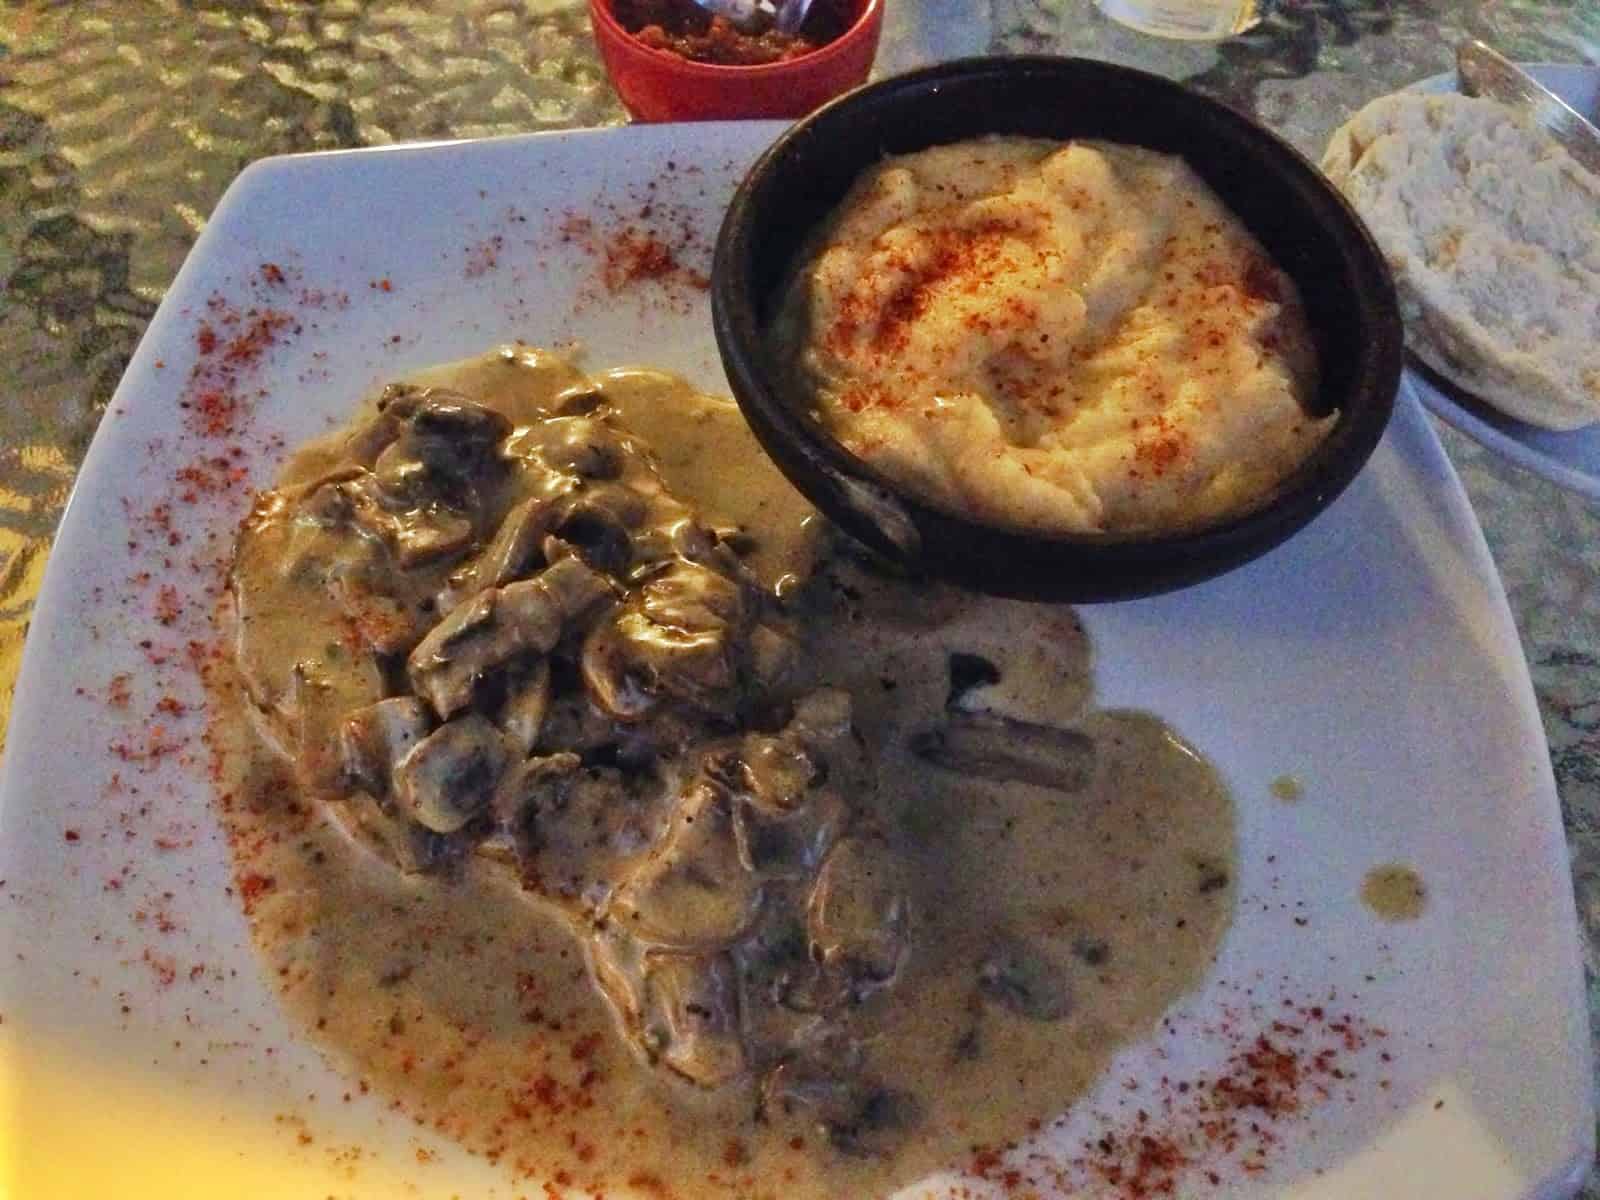 Pork steak and mashed potatoes at Café del Pintor in Valparaíso, Chile